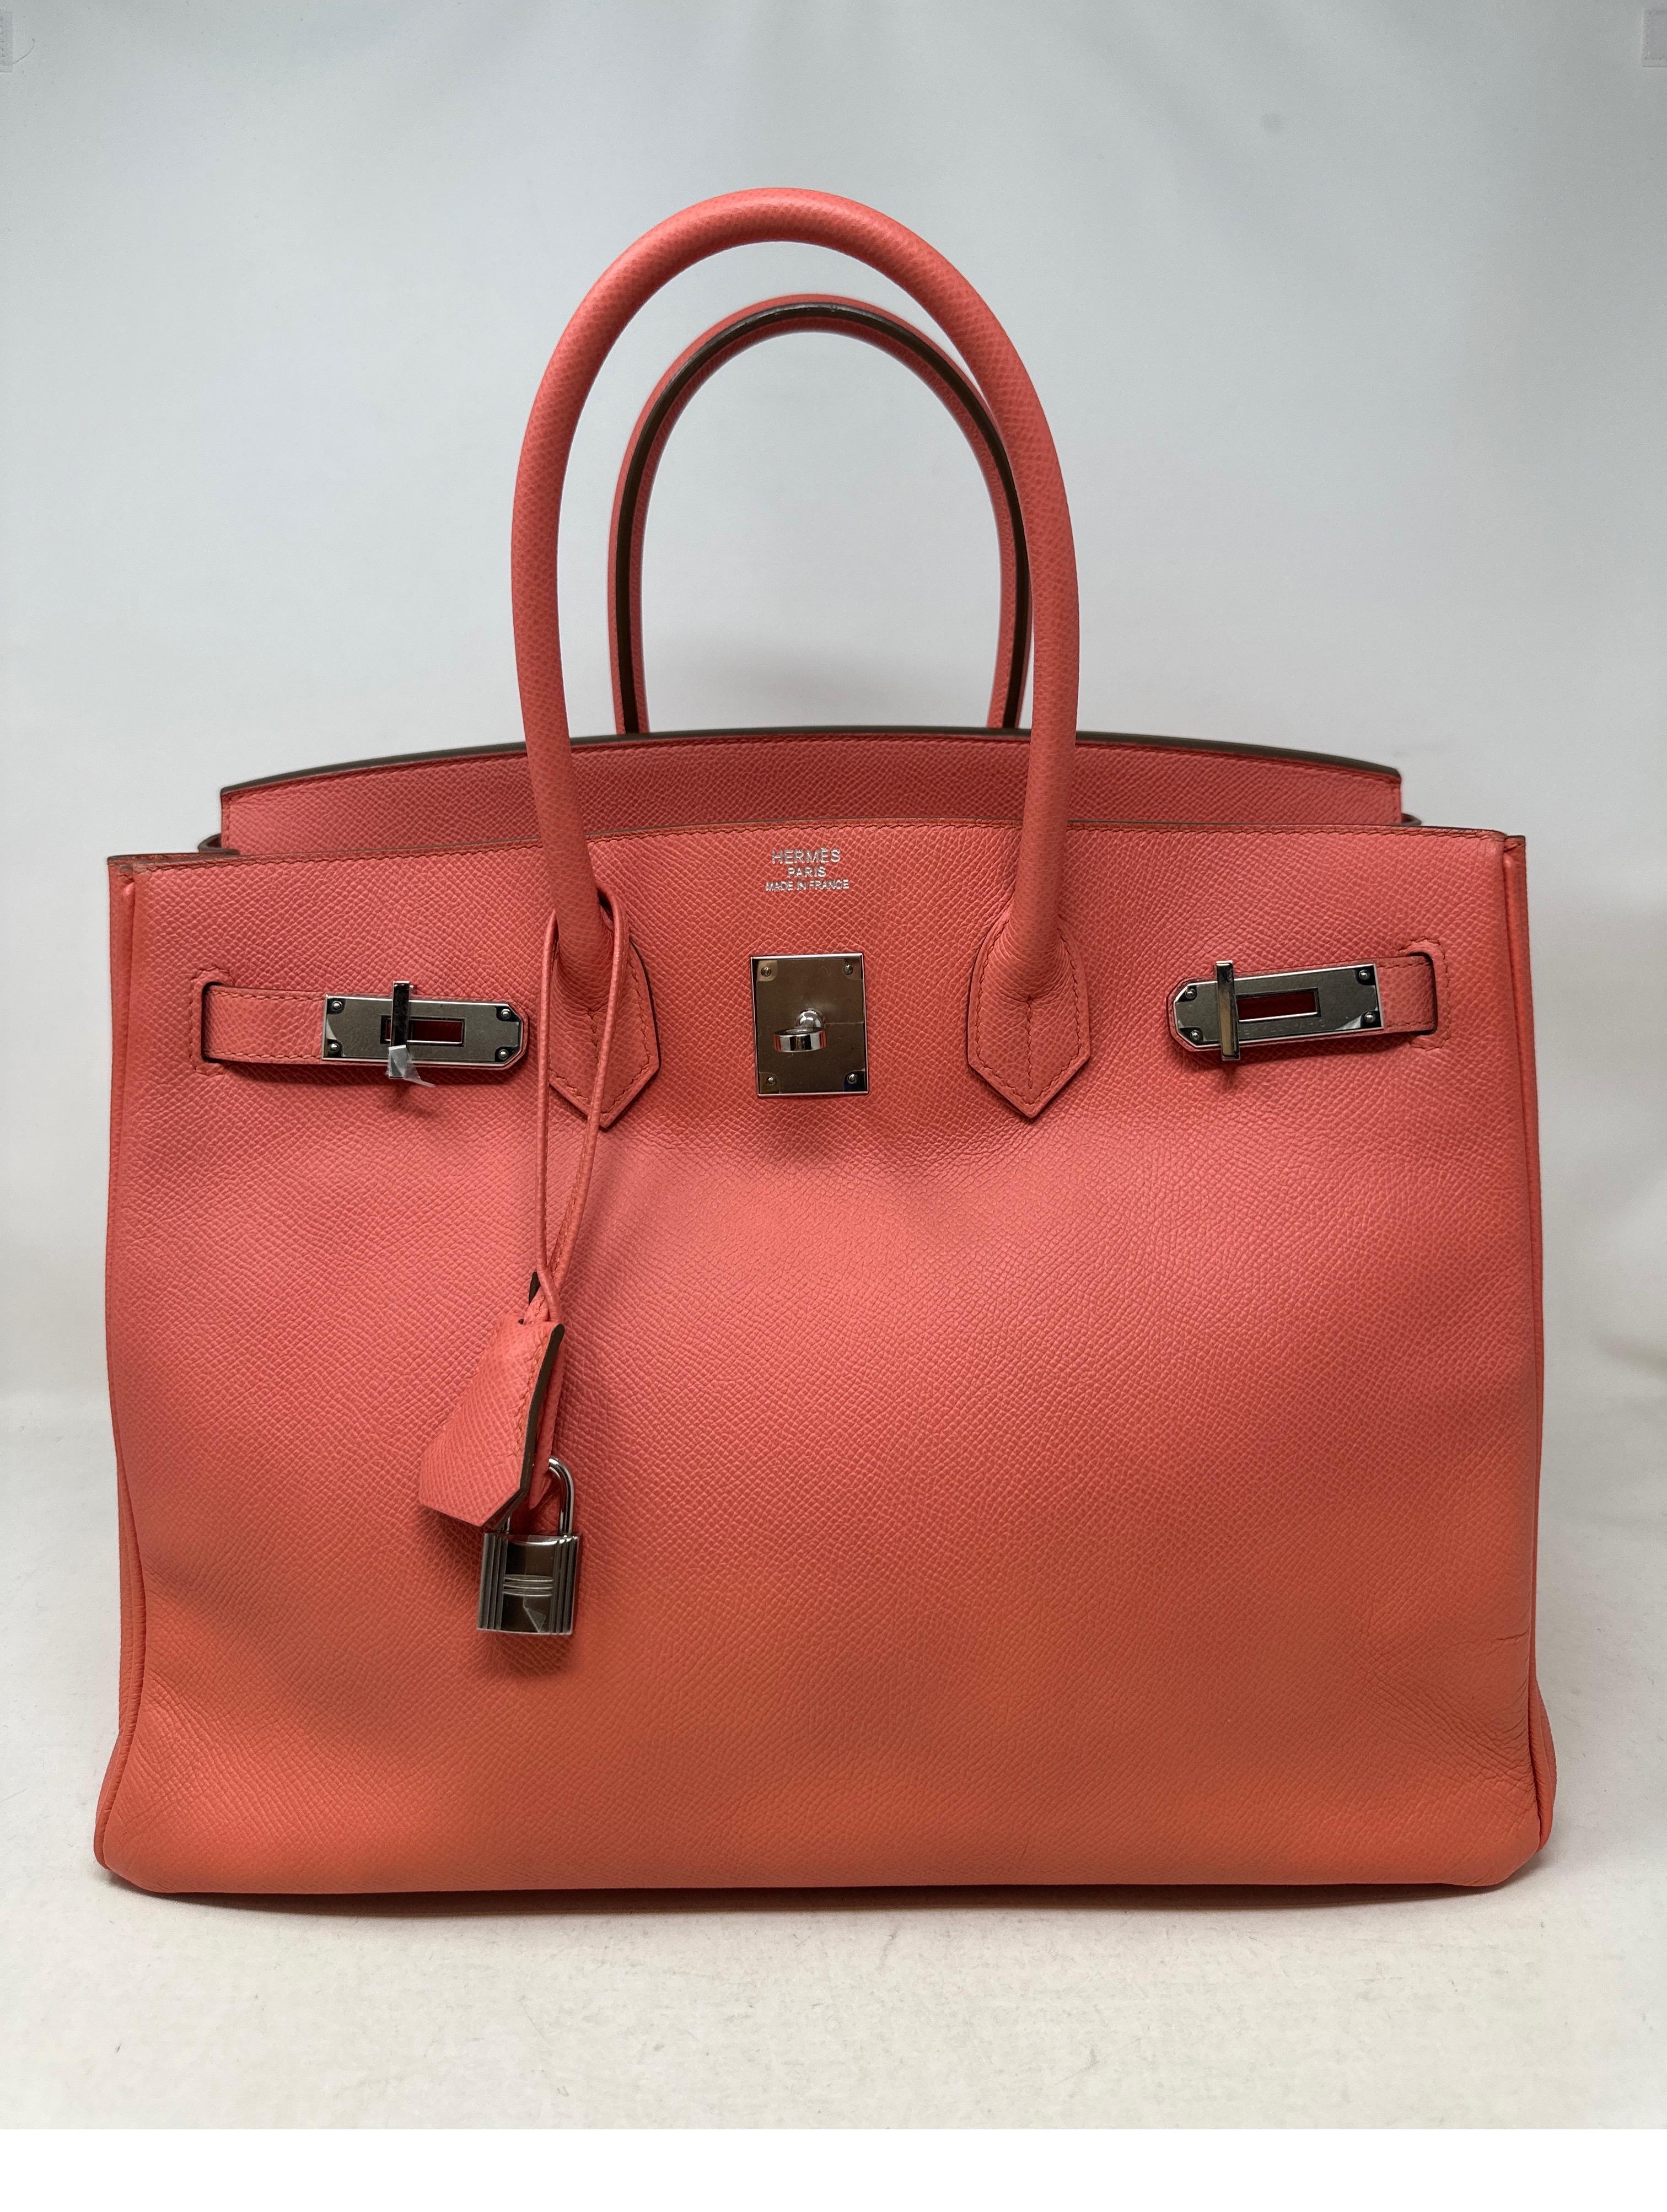 Hermes Pink Flamingo Birkin 35 Bag. Excellent condition. Epsom leather. Palladium hardware. Q stamp. Pretty in pink color. Priced to sell. Includes clochette, lock, keys, and dust bag. Guaranteed authentic. 